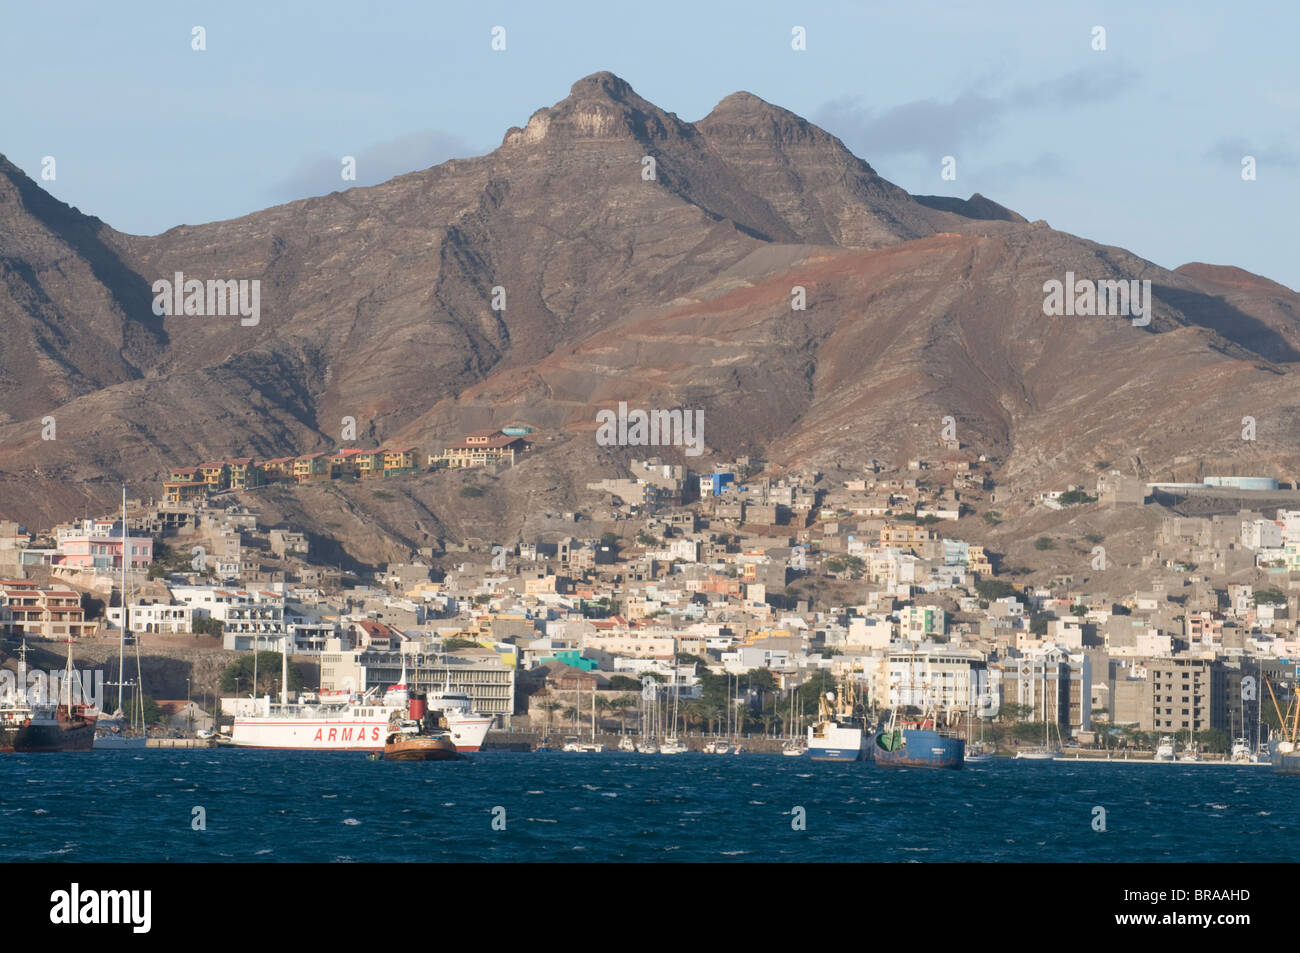 View over fishing port and city, San Vincente, Mindelo, Cape Verde Islands, Atlantic, Africa Stock Photo